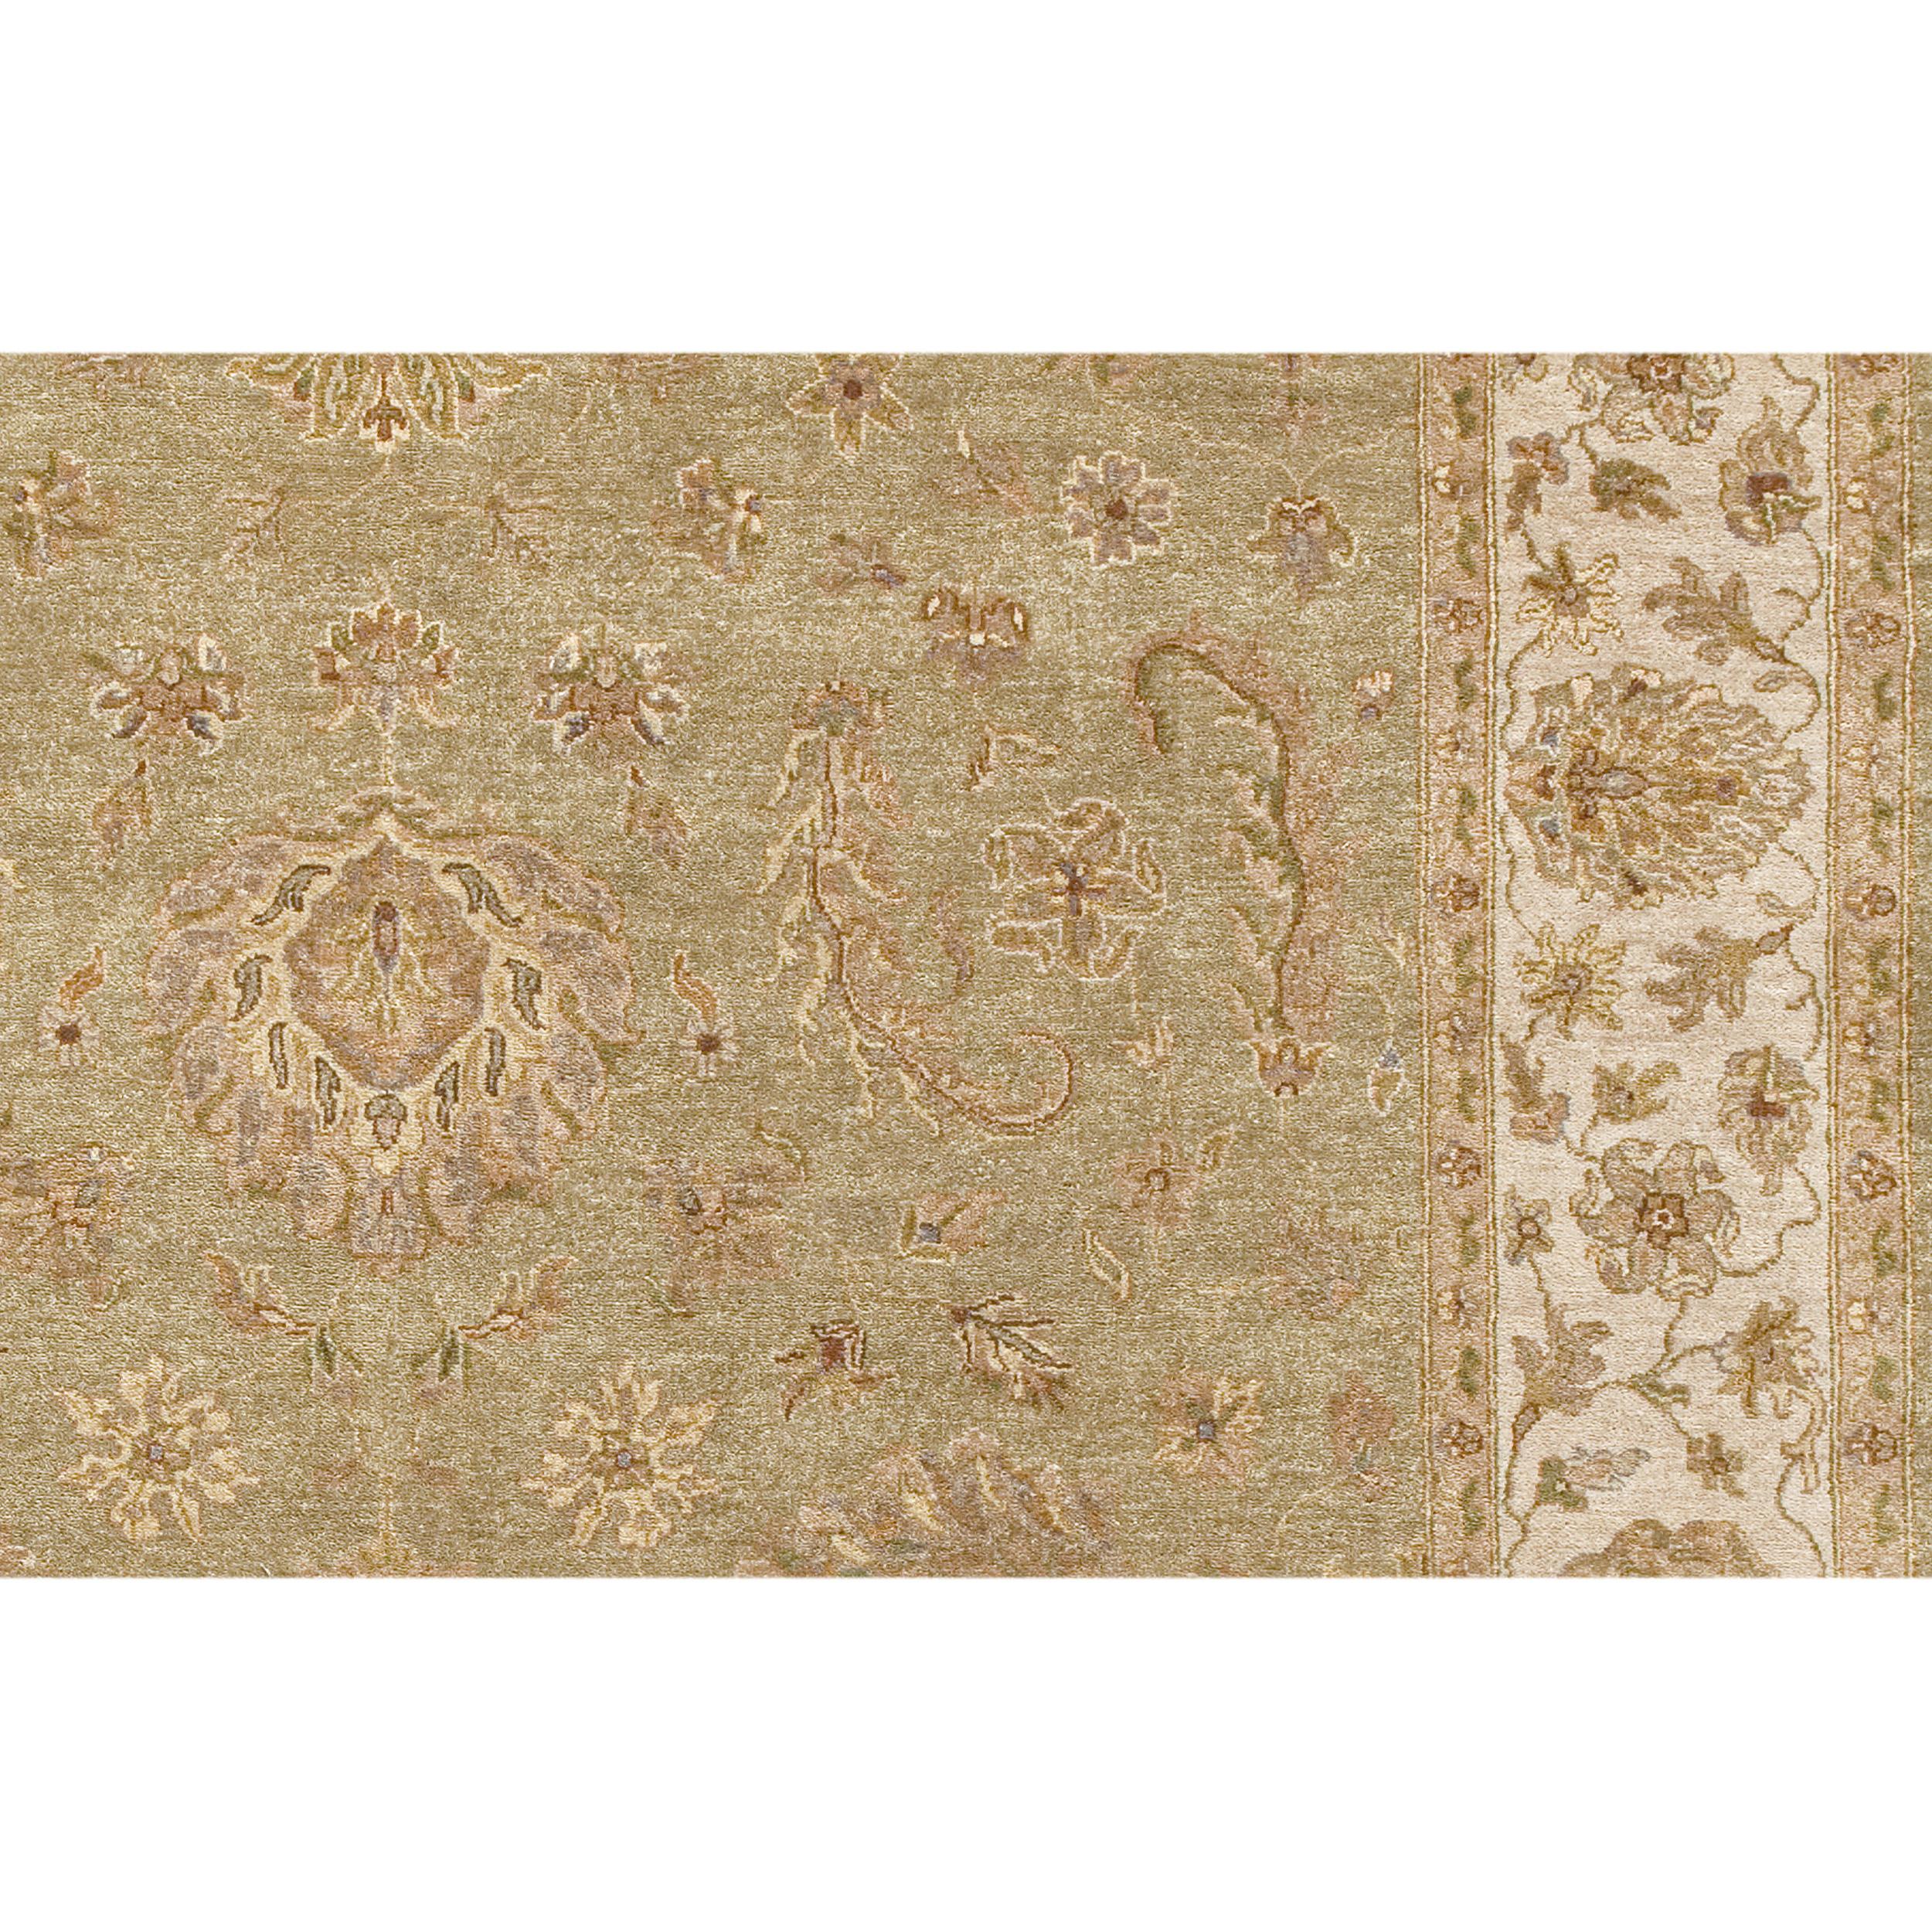 Luxury Traditional Hand-Knotted Amritsar Agra Lt. Green/Ivory 12x15 Rug In New Condition For Sale In Secaucus, NJ